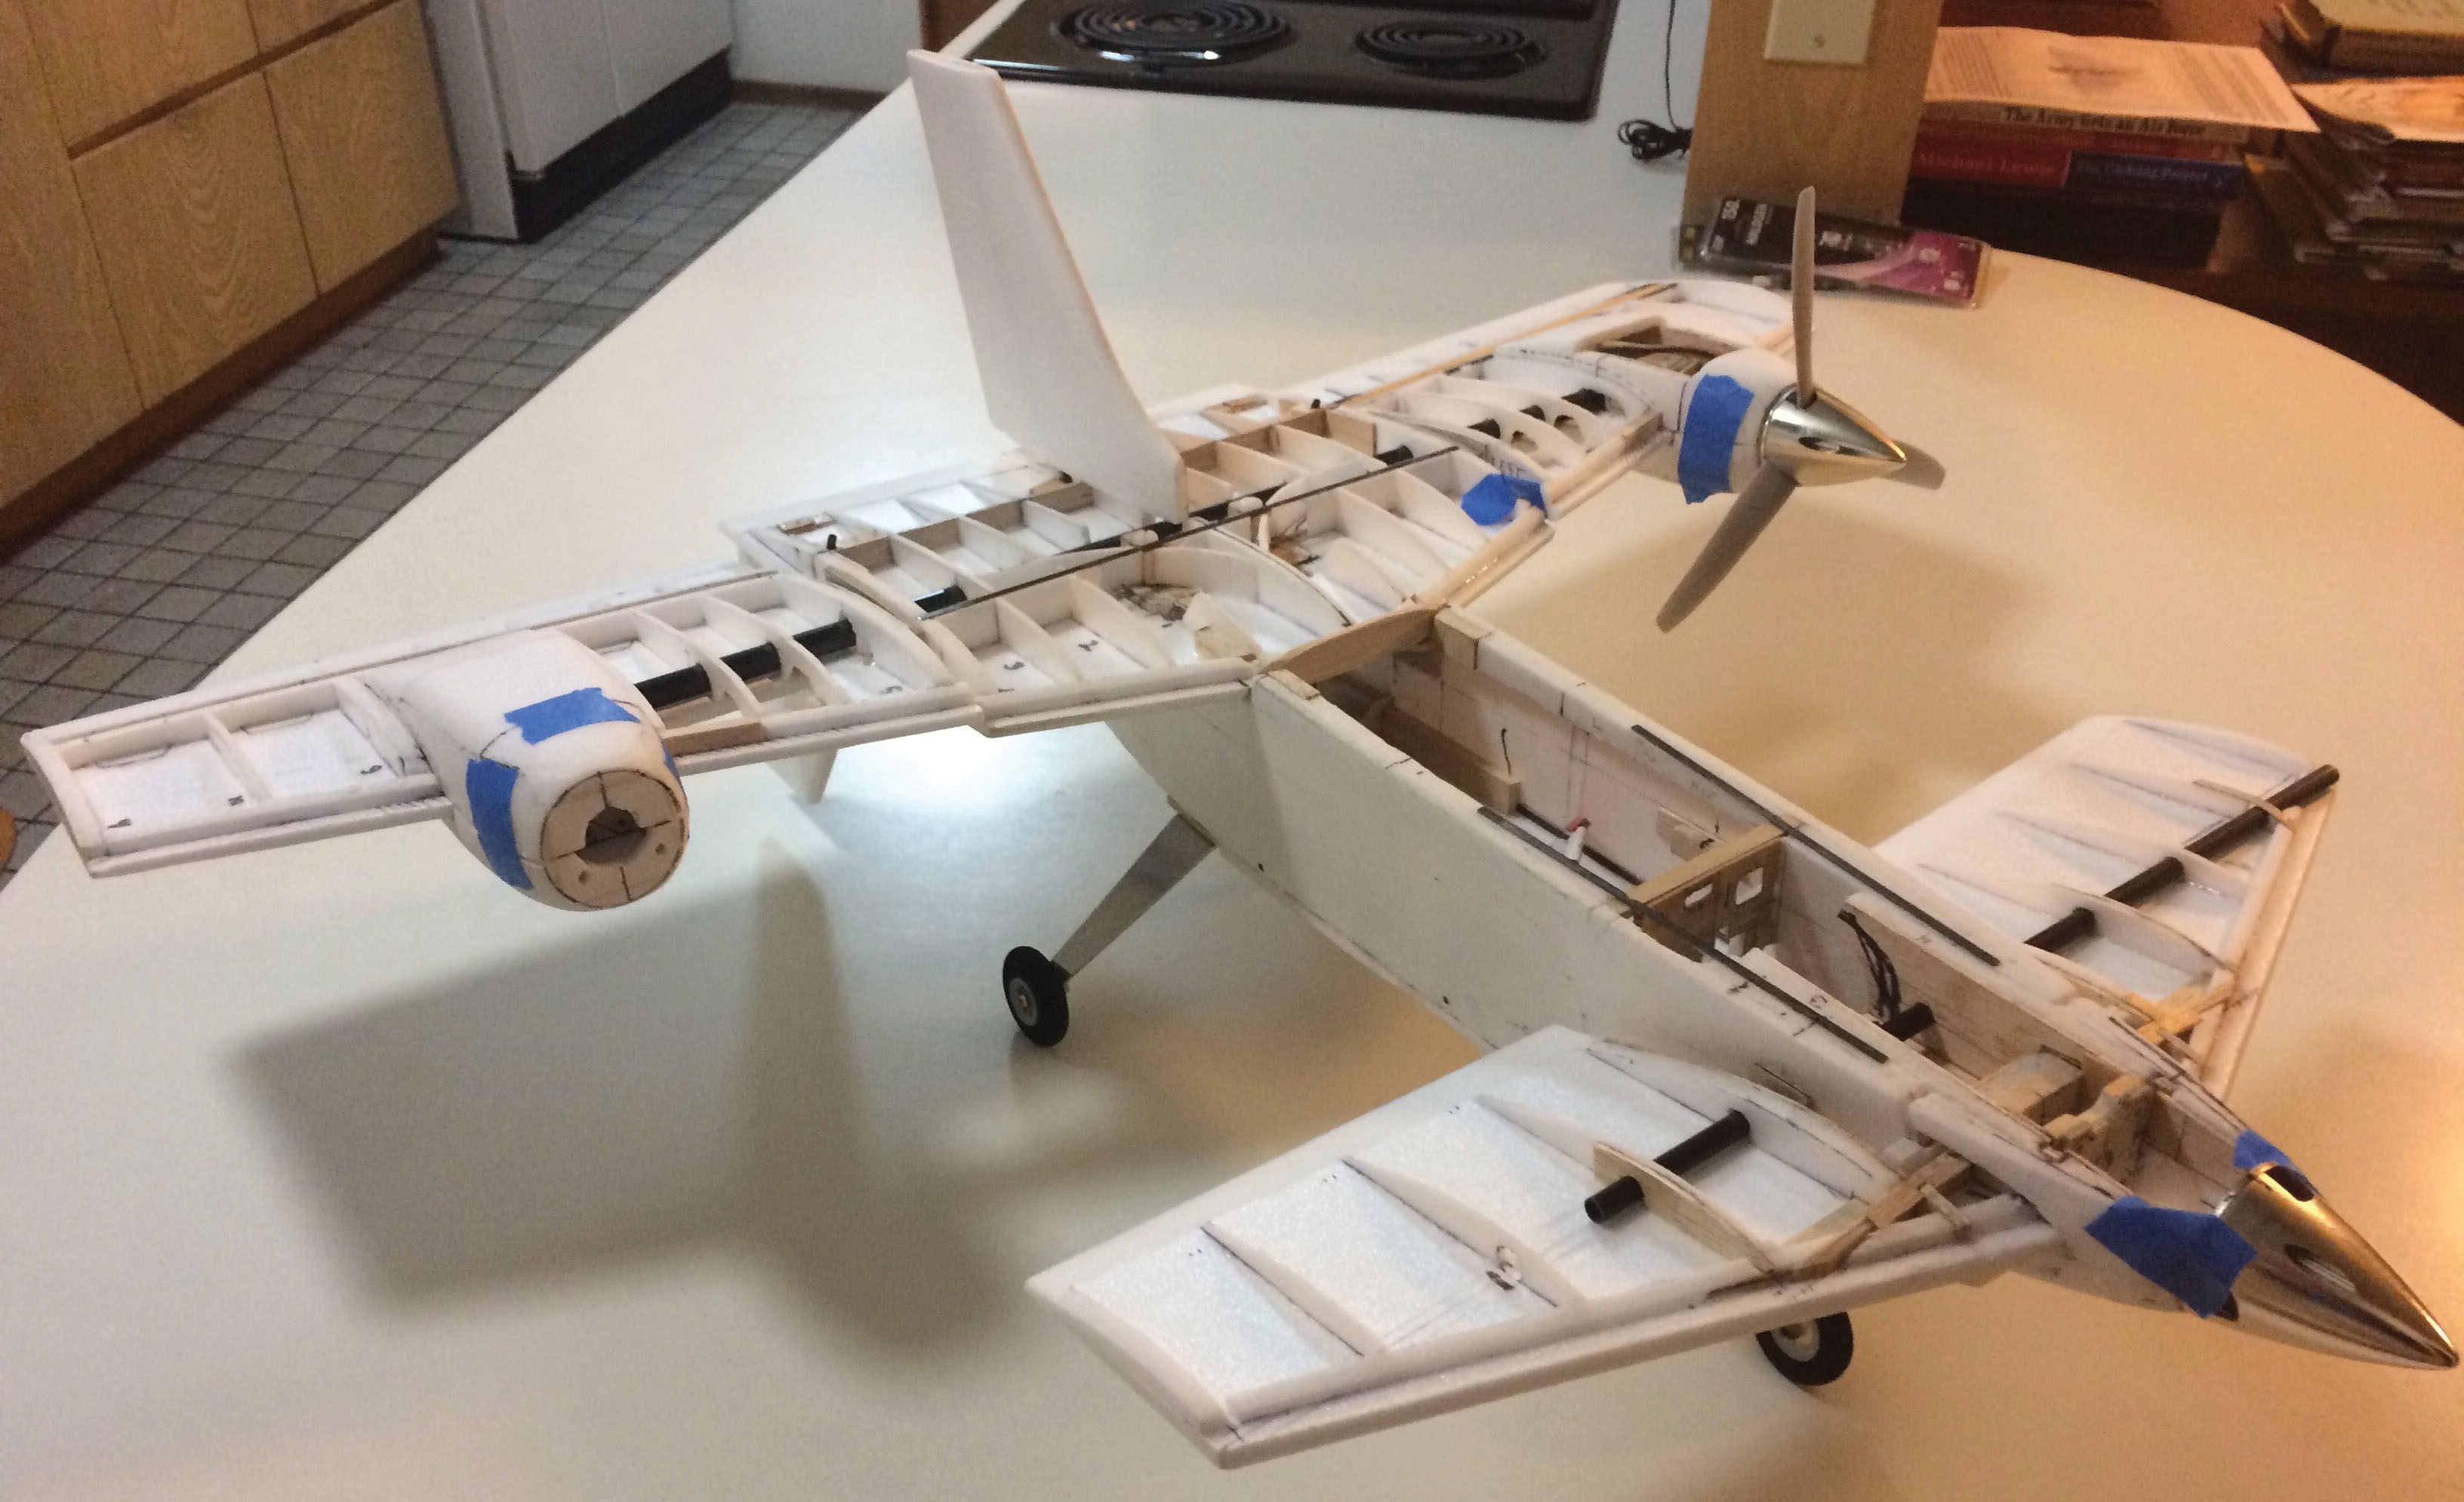 the wings and landing gear are attached